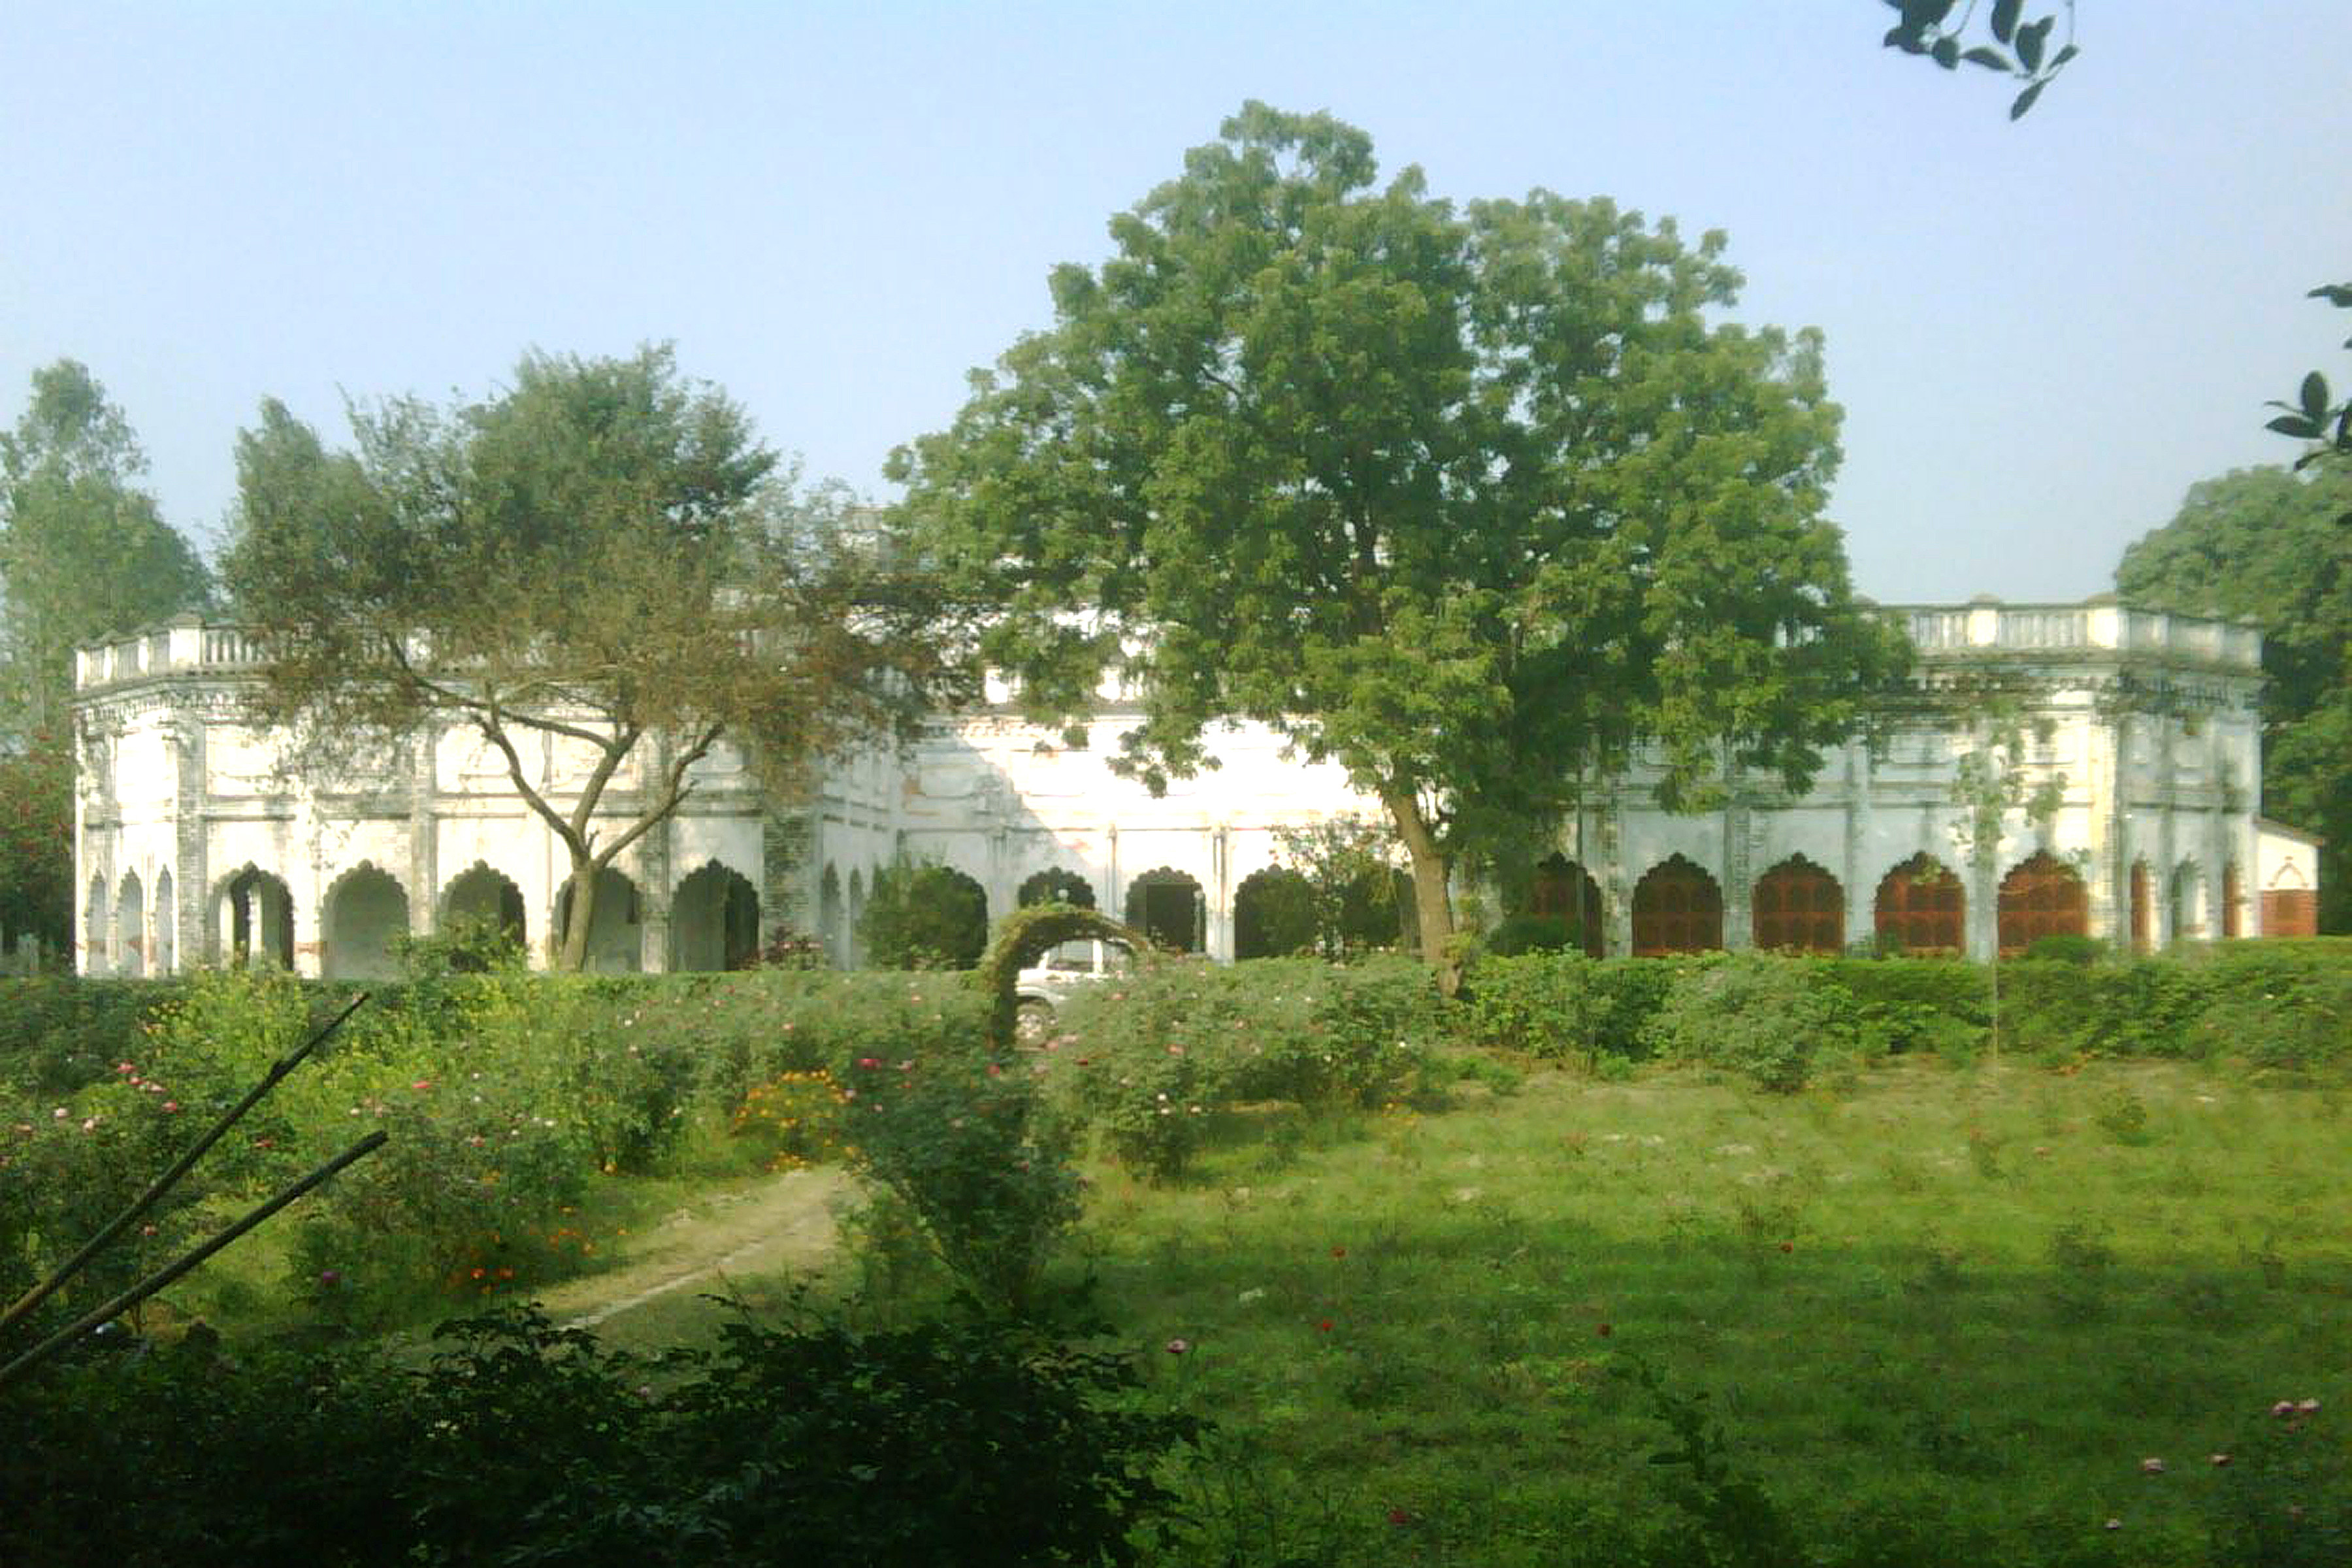 ‘Rosavile’ – Sir Samad’s residence in Rampur that was constructed in 1907.